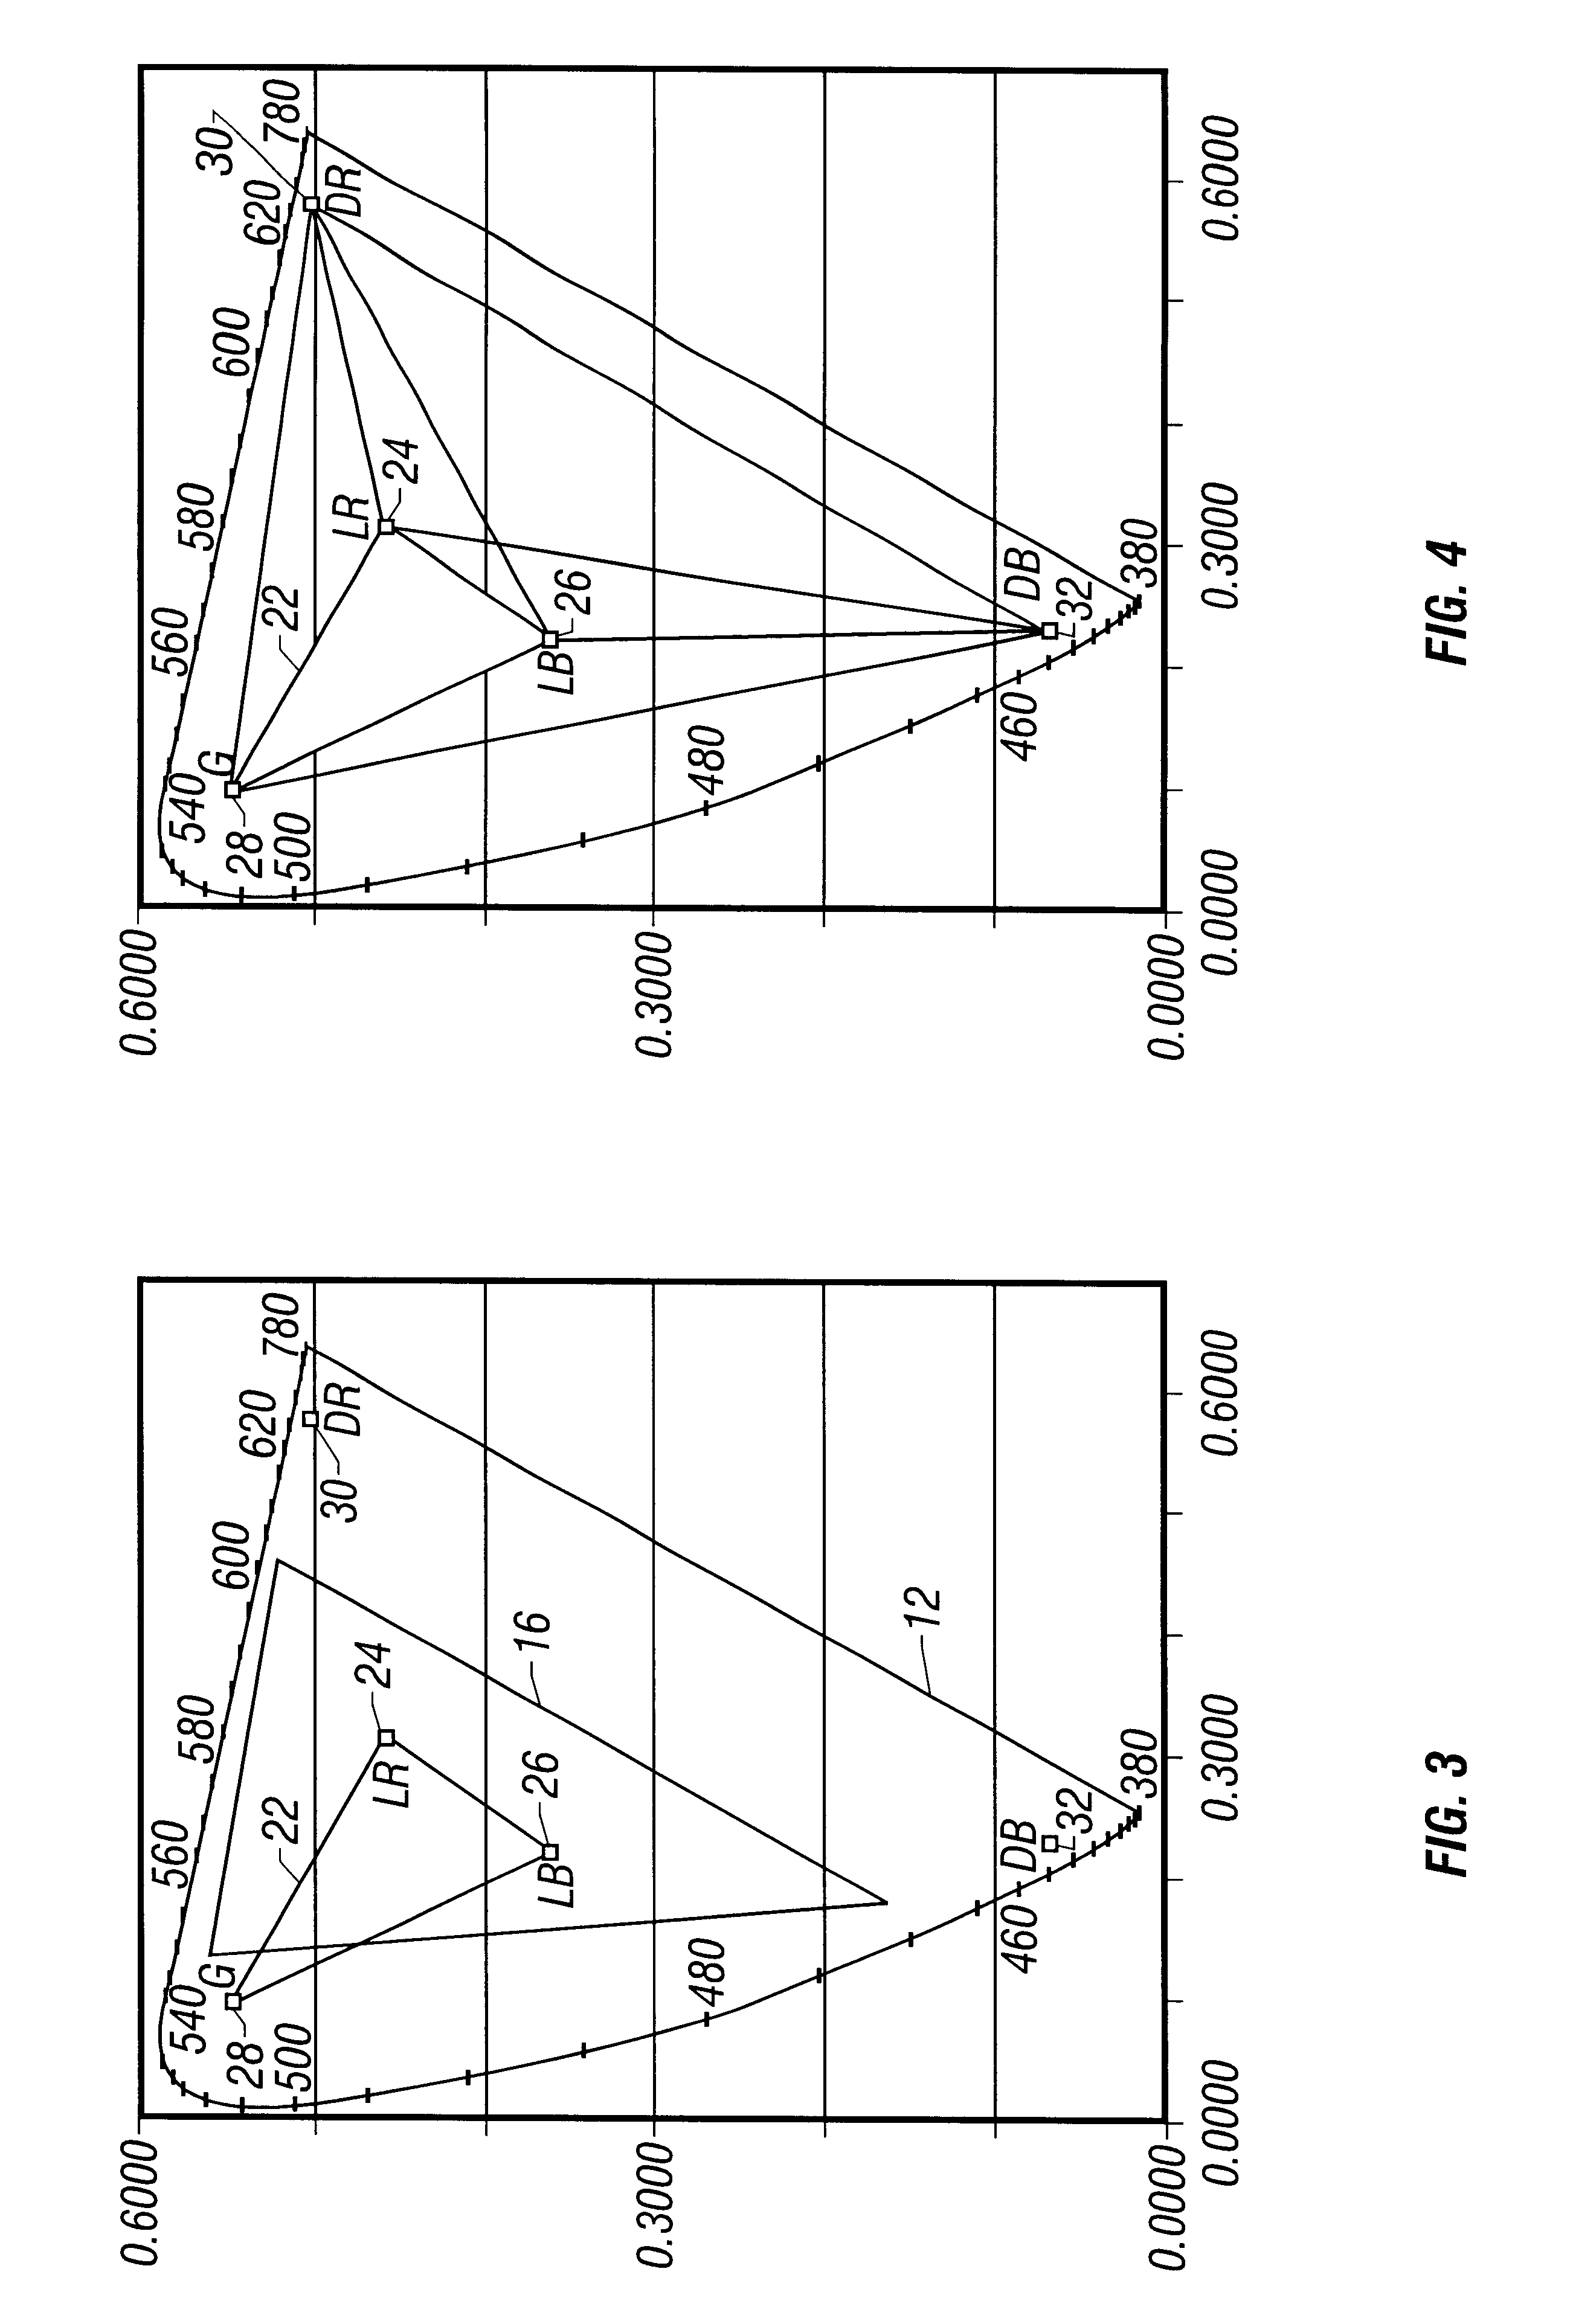 Performing color conversion in extended color polymer displays